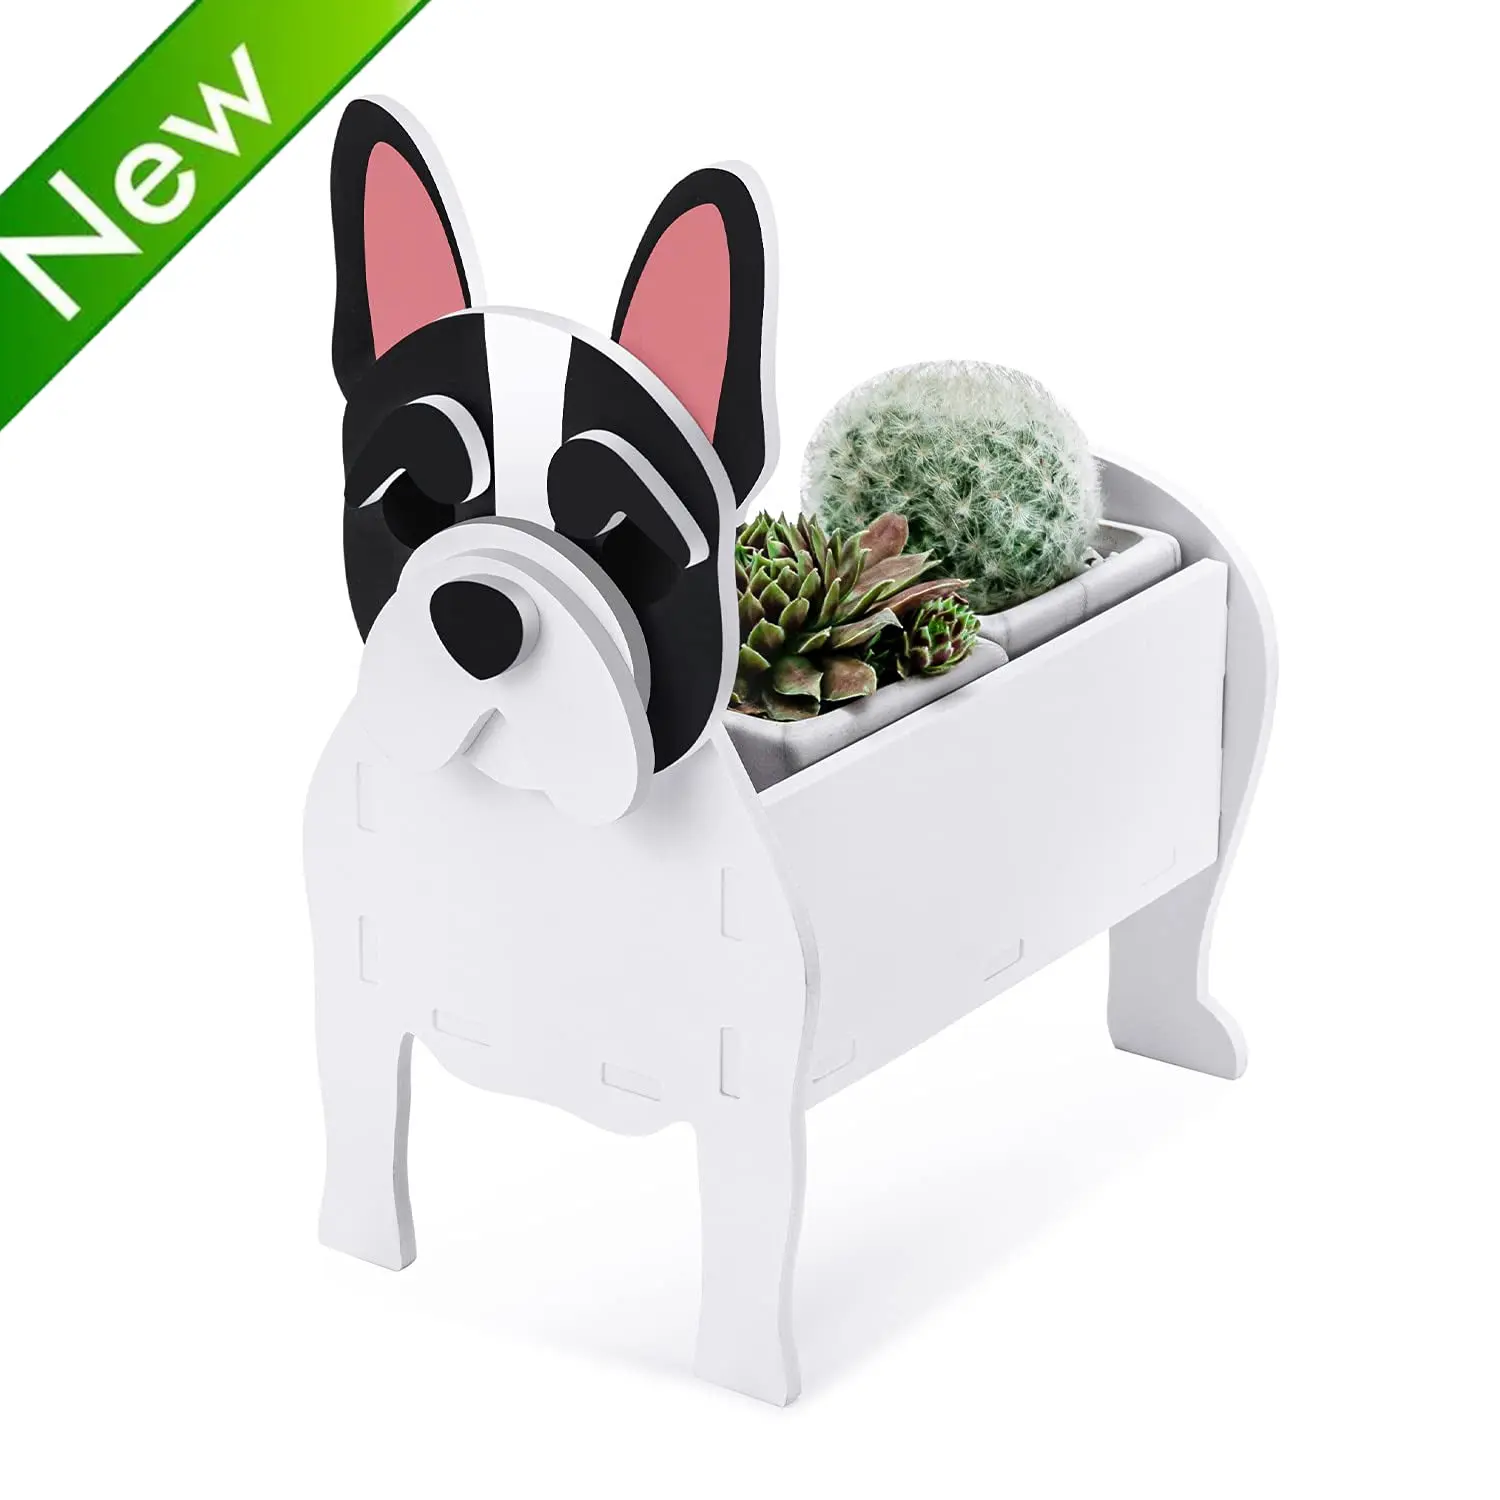 D38 Bulldog Dog-planter Outdoor Indoor Garden Plants Storage Container Flower Pot Cute Animal Dog Planters For Office Home Decor